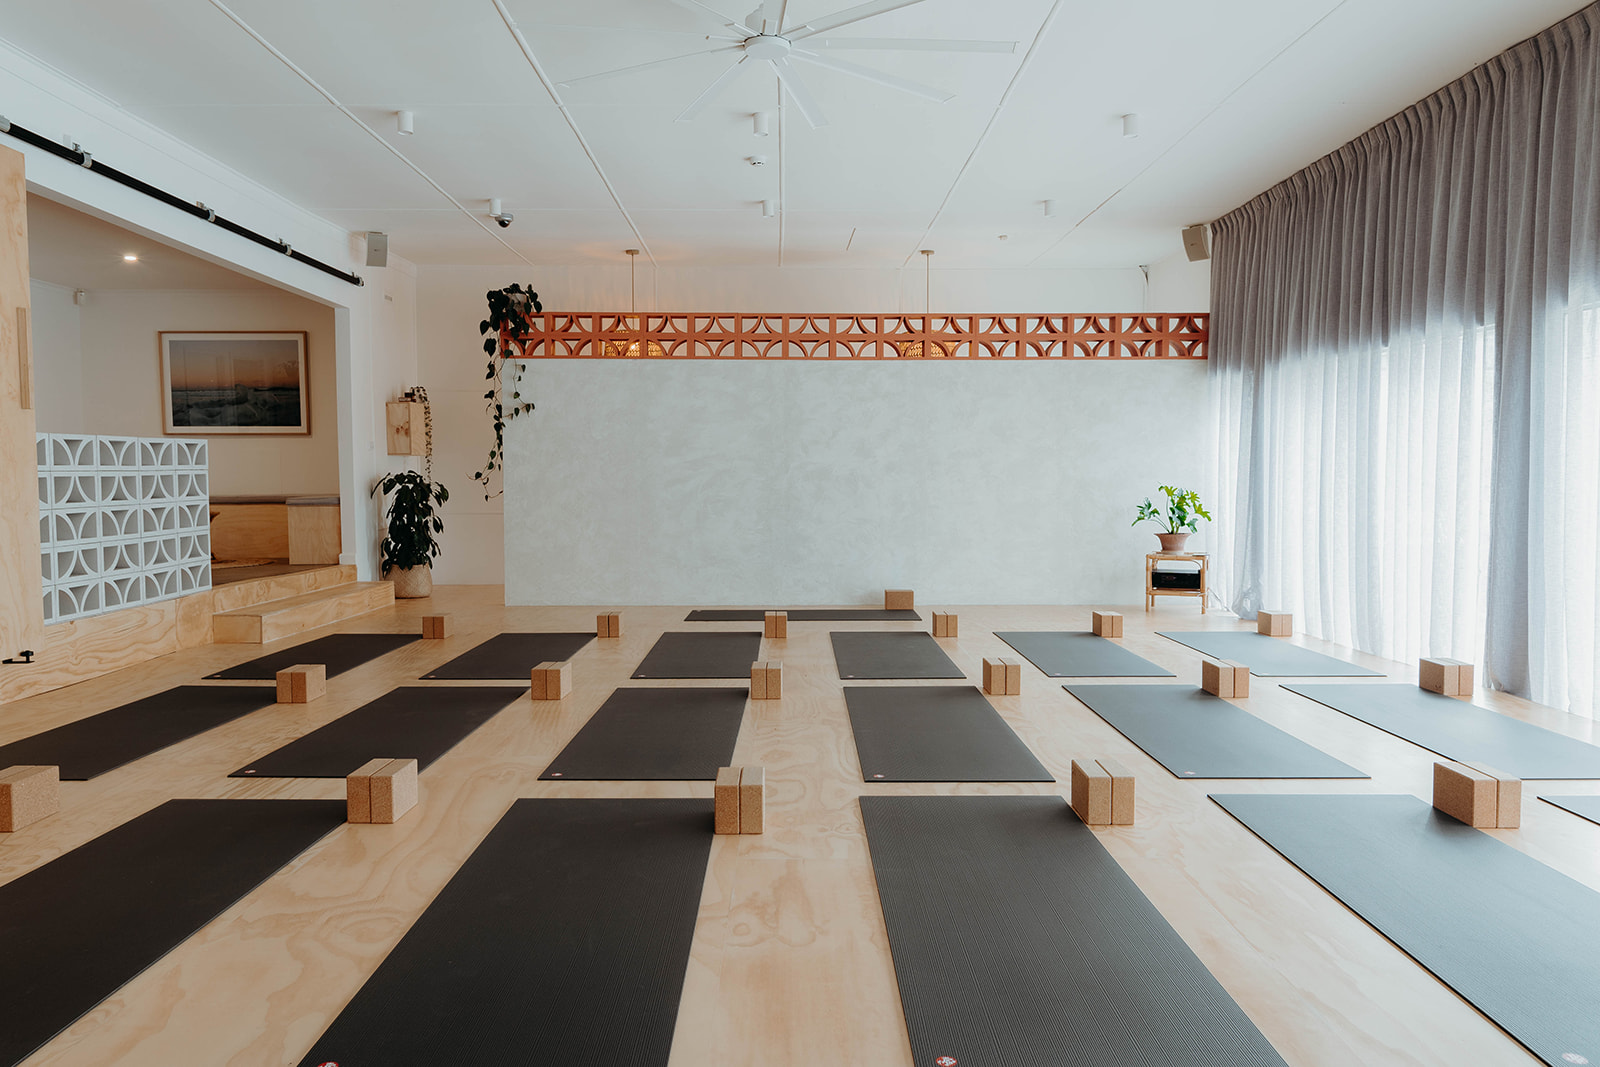 Prepare to get bendy at some of the best yoga studios in the